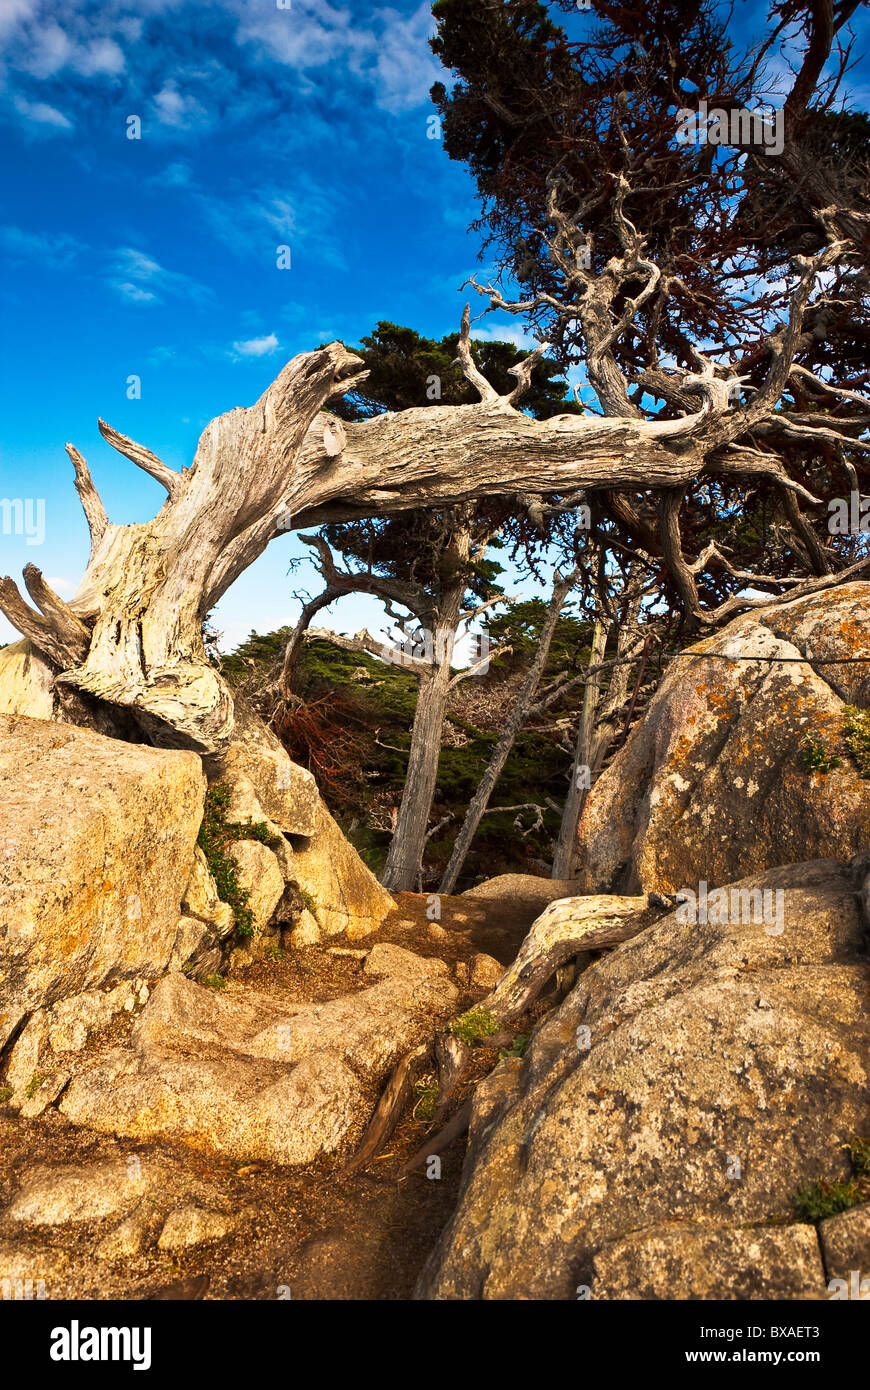 An old cypress distorted by the wind curves over a rocky path Stock Photo